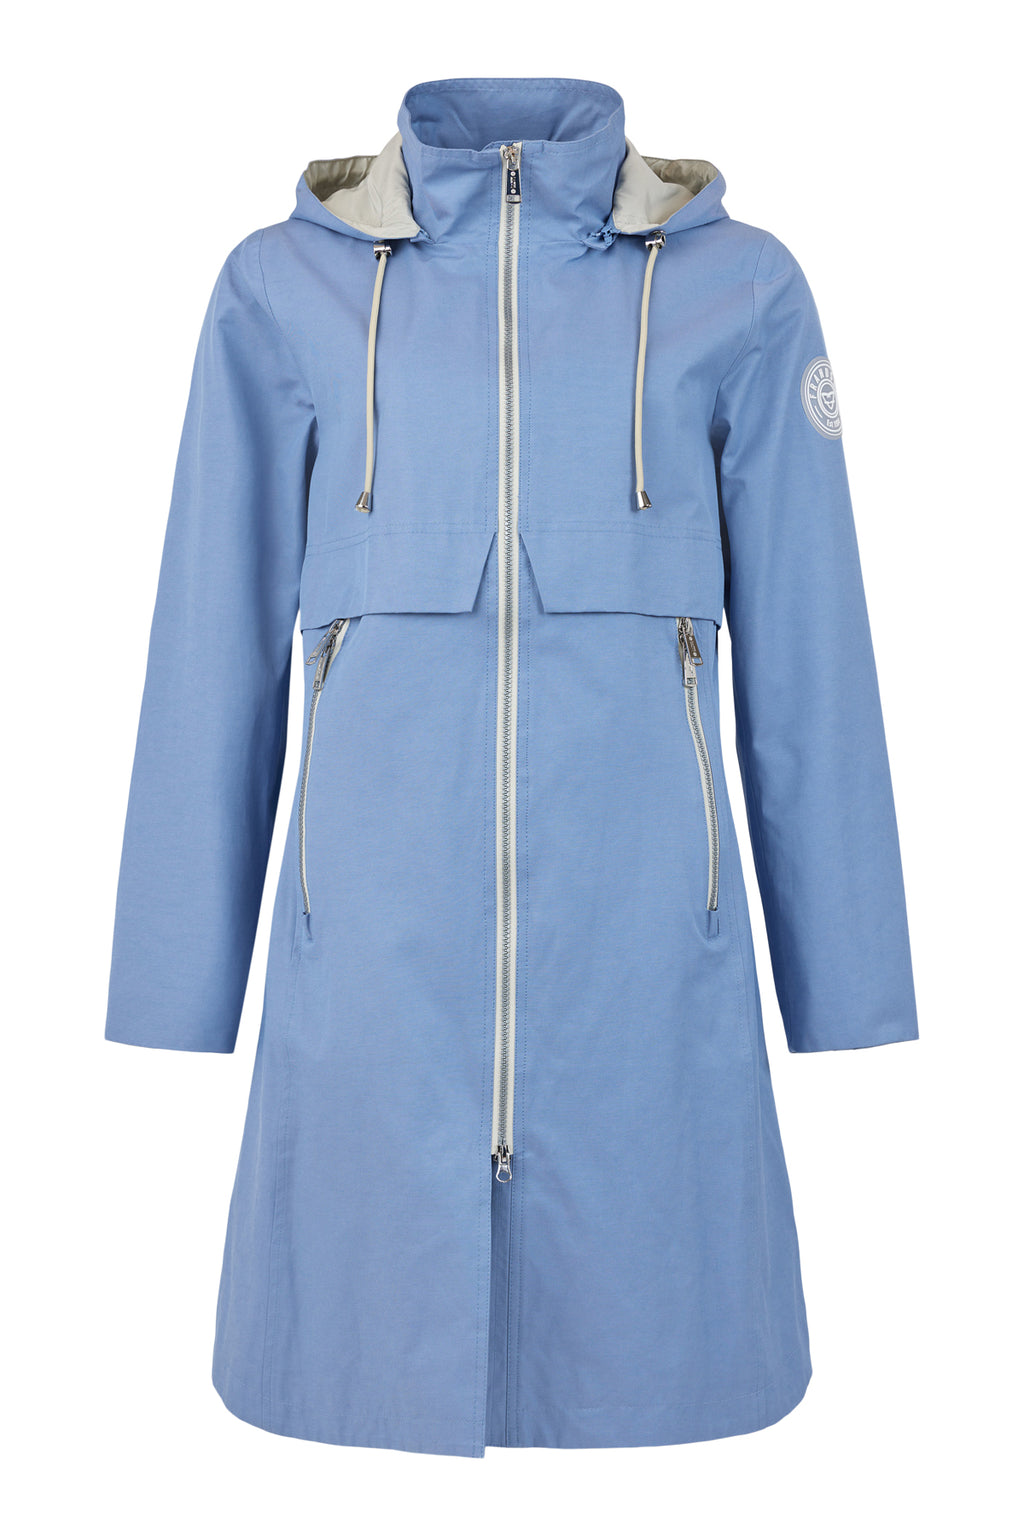 <p>Frandsen brushed cotton style raincoat in dusty blue</p>
<p>Product code 860</p>